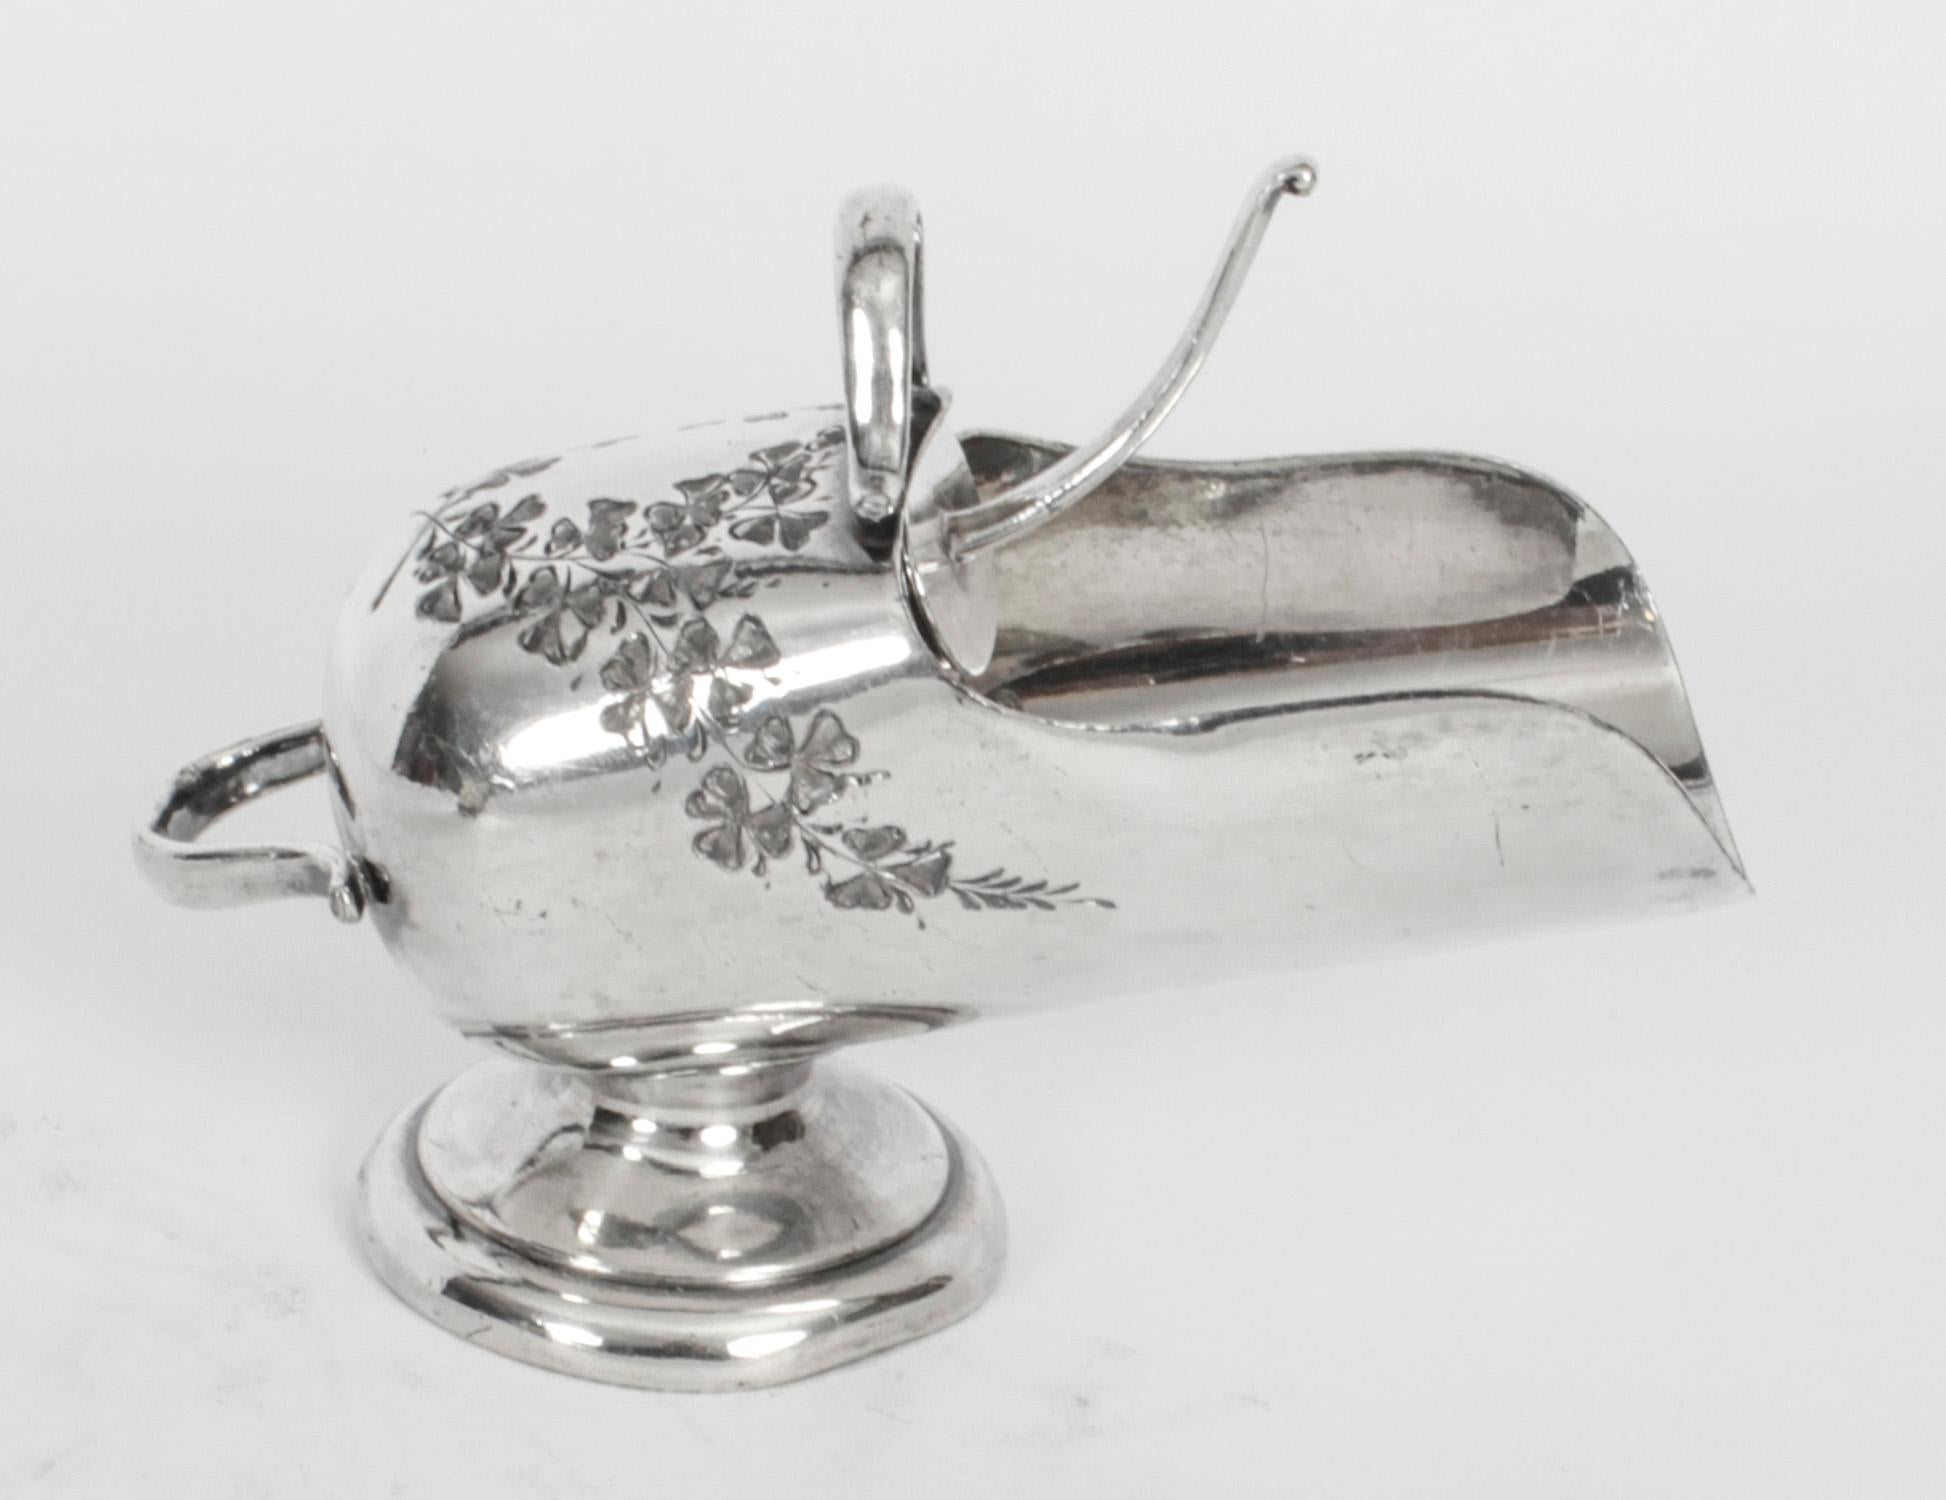 A charming and unusual Victorian silver plated sugar bowl in the form of a coal scuttle with a shovel as the spoon, marked C & C over C into a trefoil, circa 1860 in date 

The cylinder shaped bowl features a front and back handle and sits on a